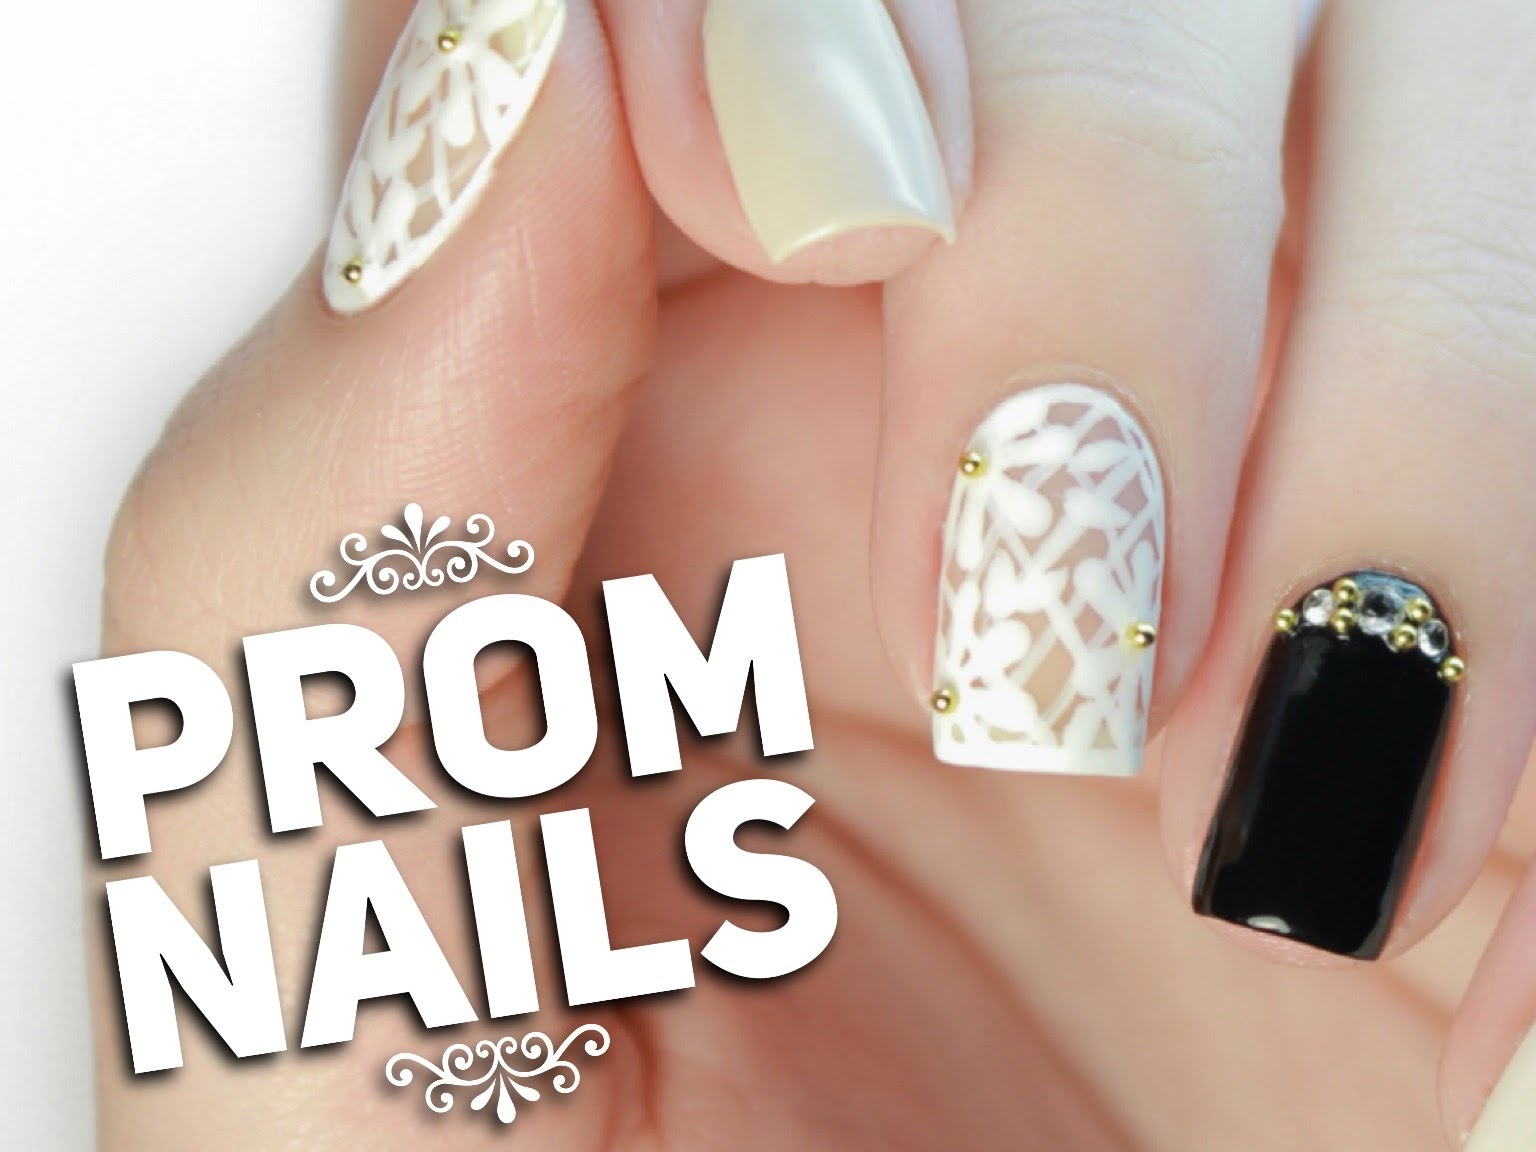 1. "Cute and Simple Prom Nail Design Ideas" - wide 6